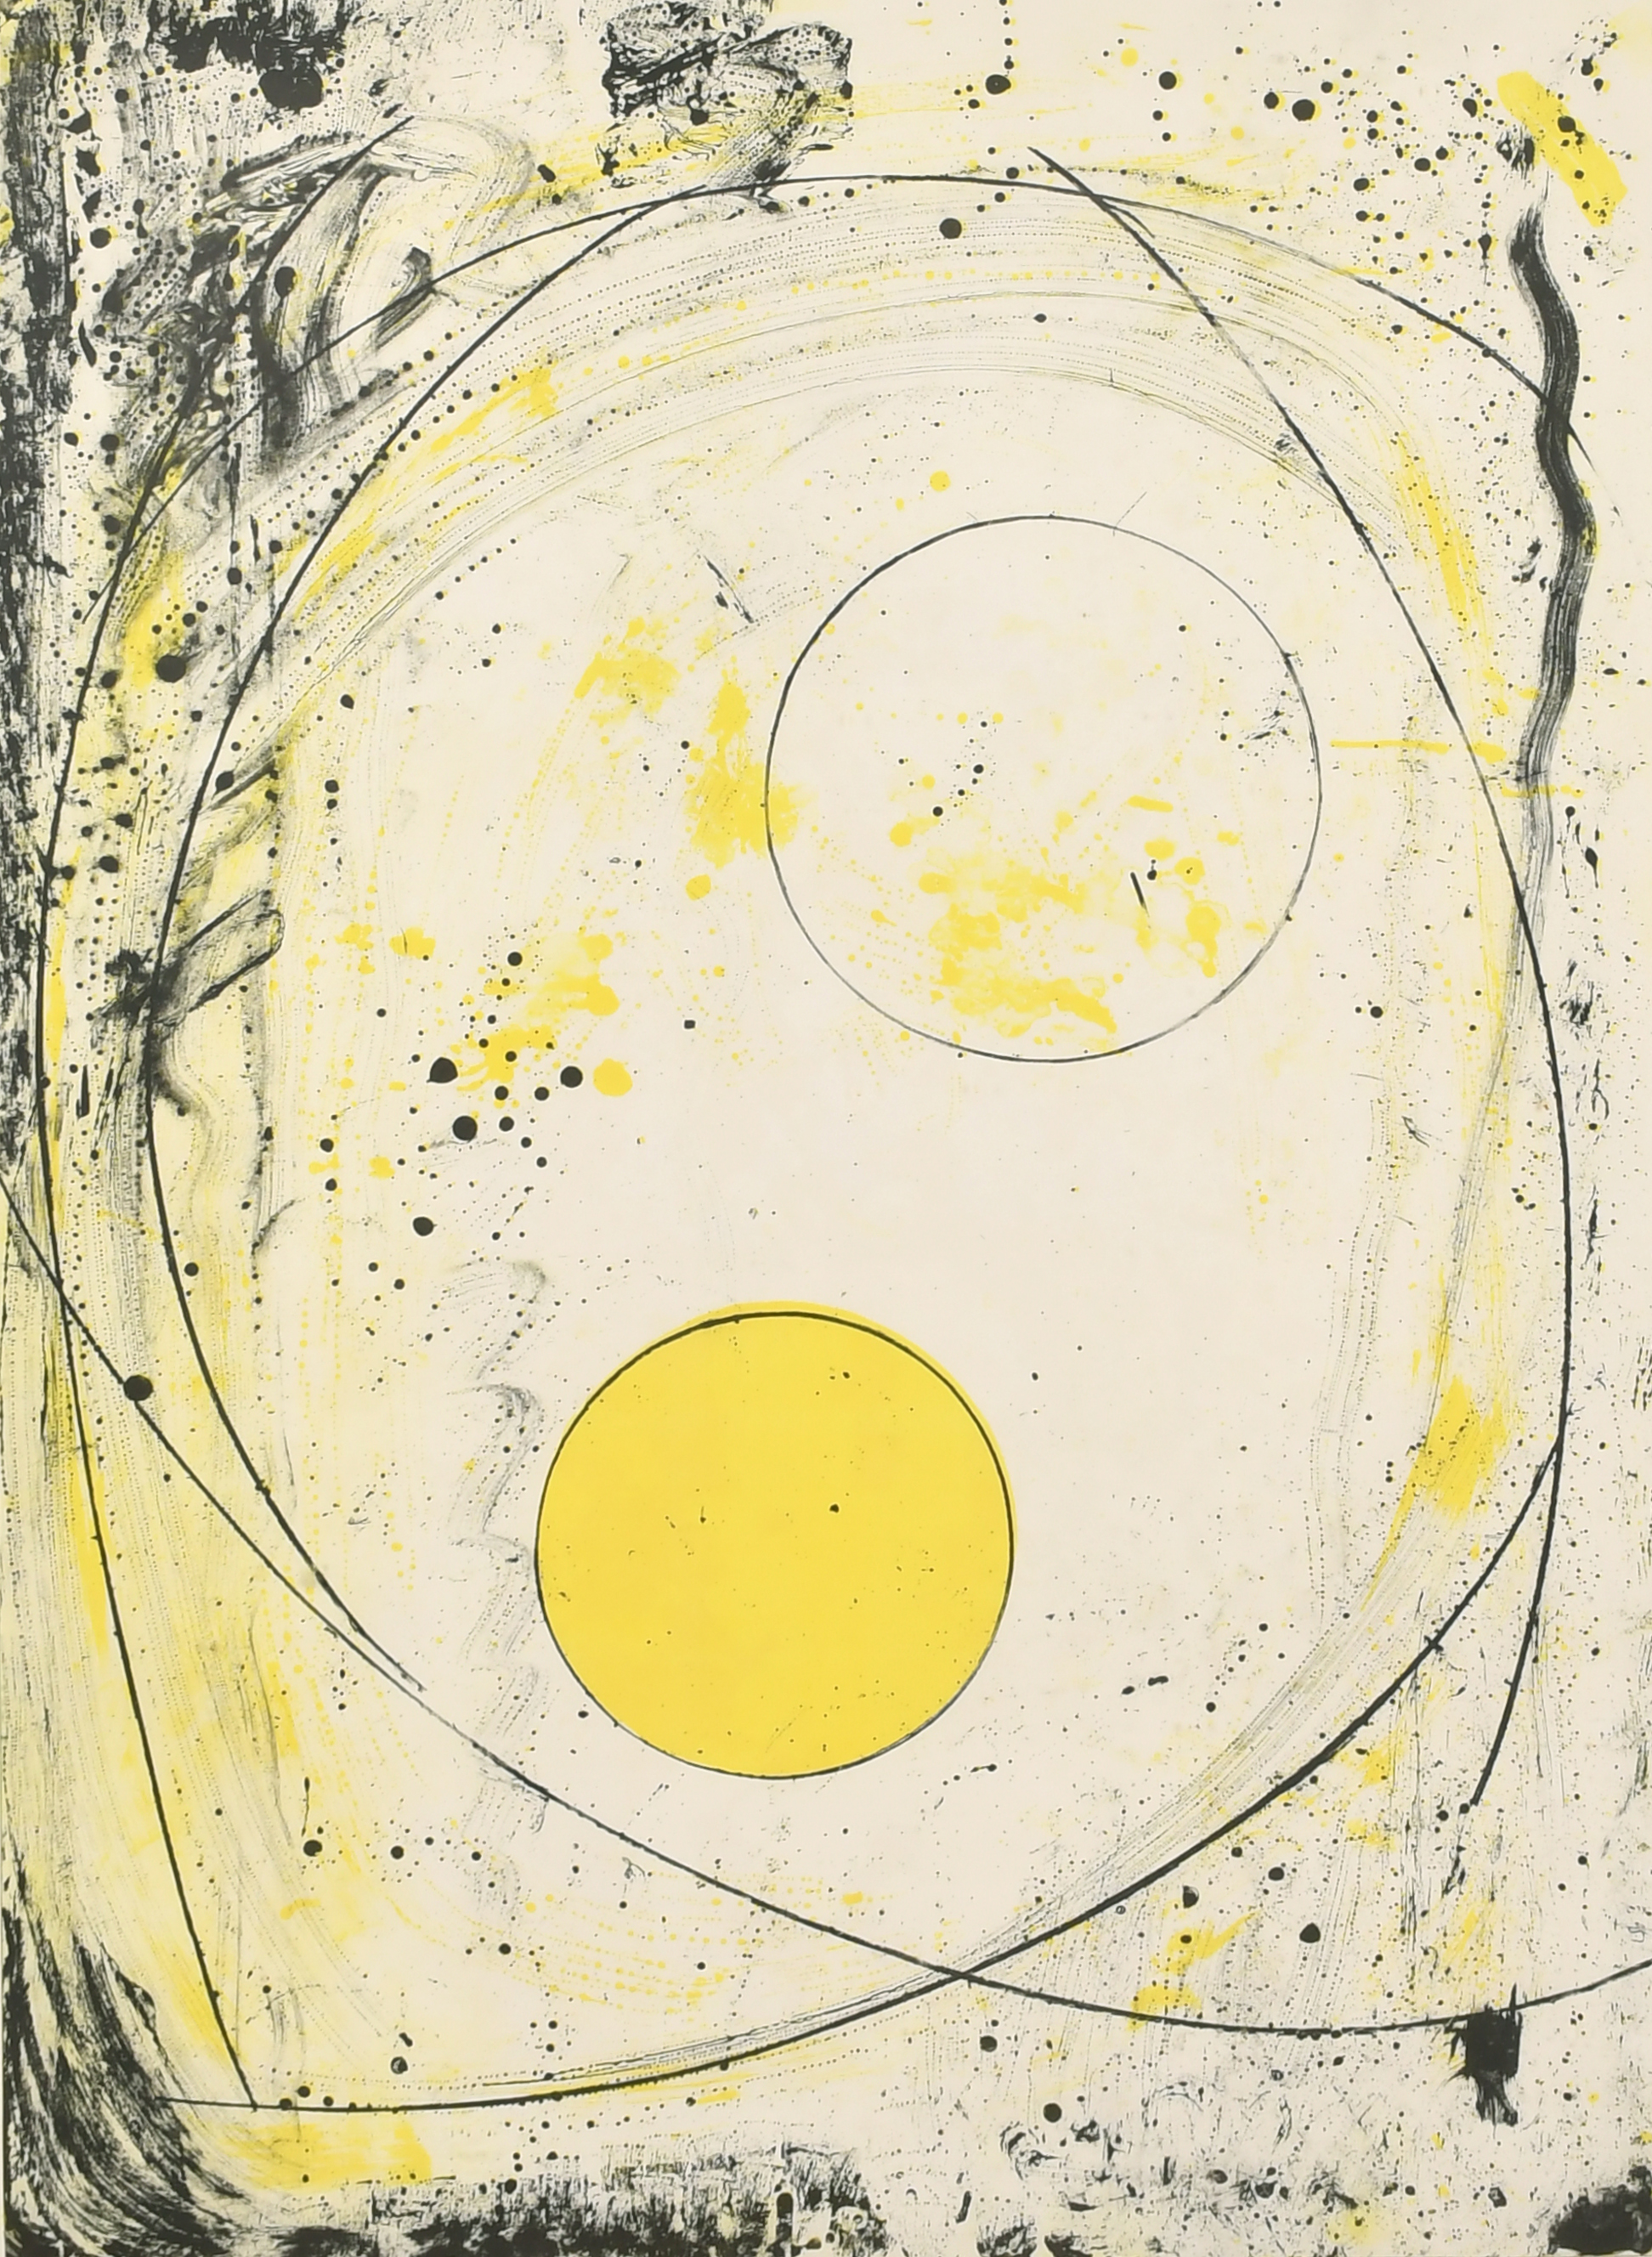 Barbara Hepworth (1903-1975) British. "Pastorale", Lithograph, Signed and numbered 4/60 in pencil,